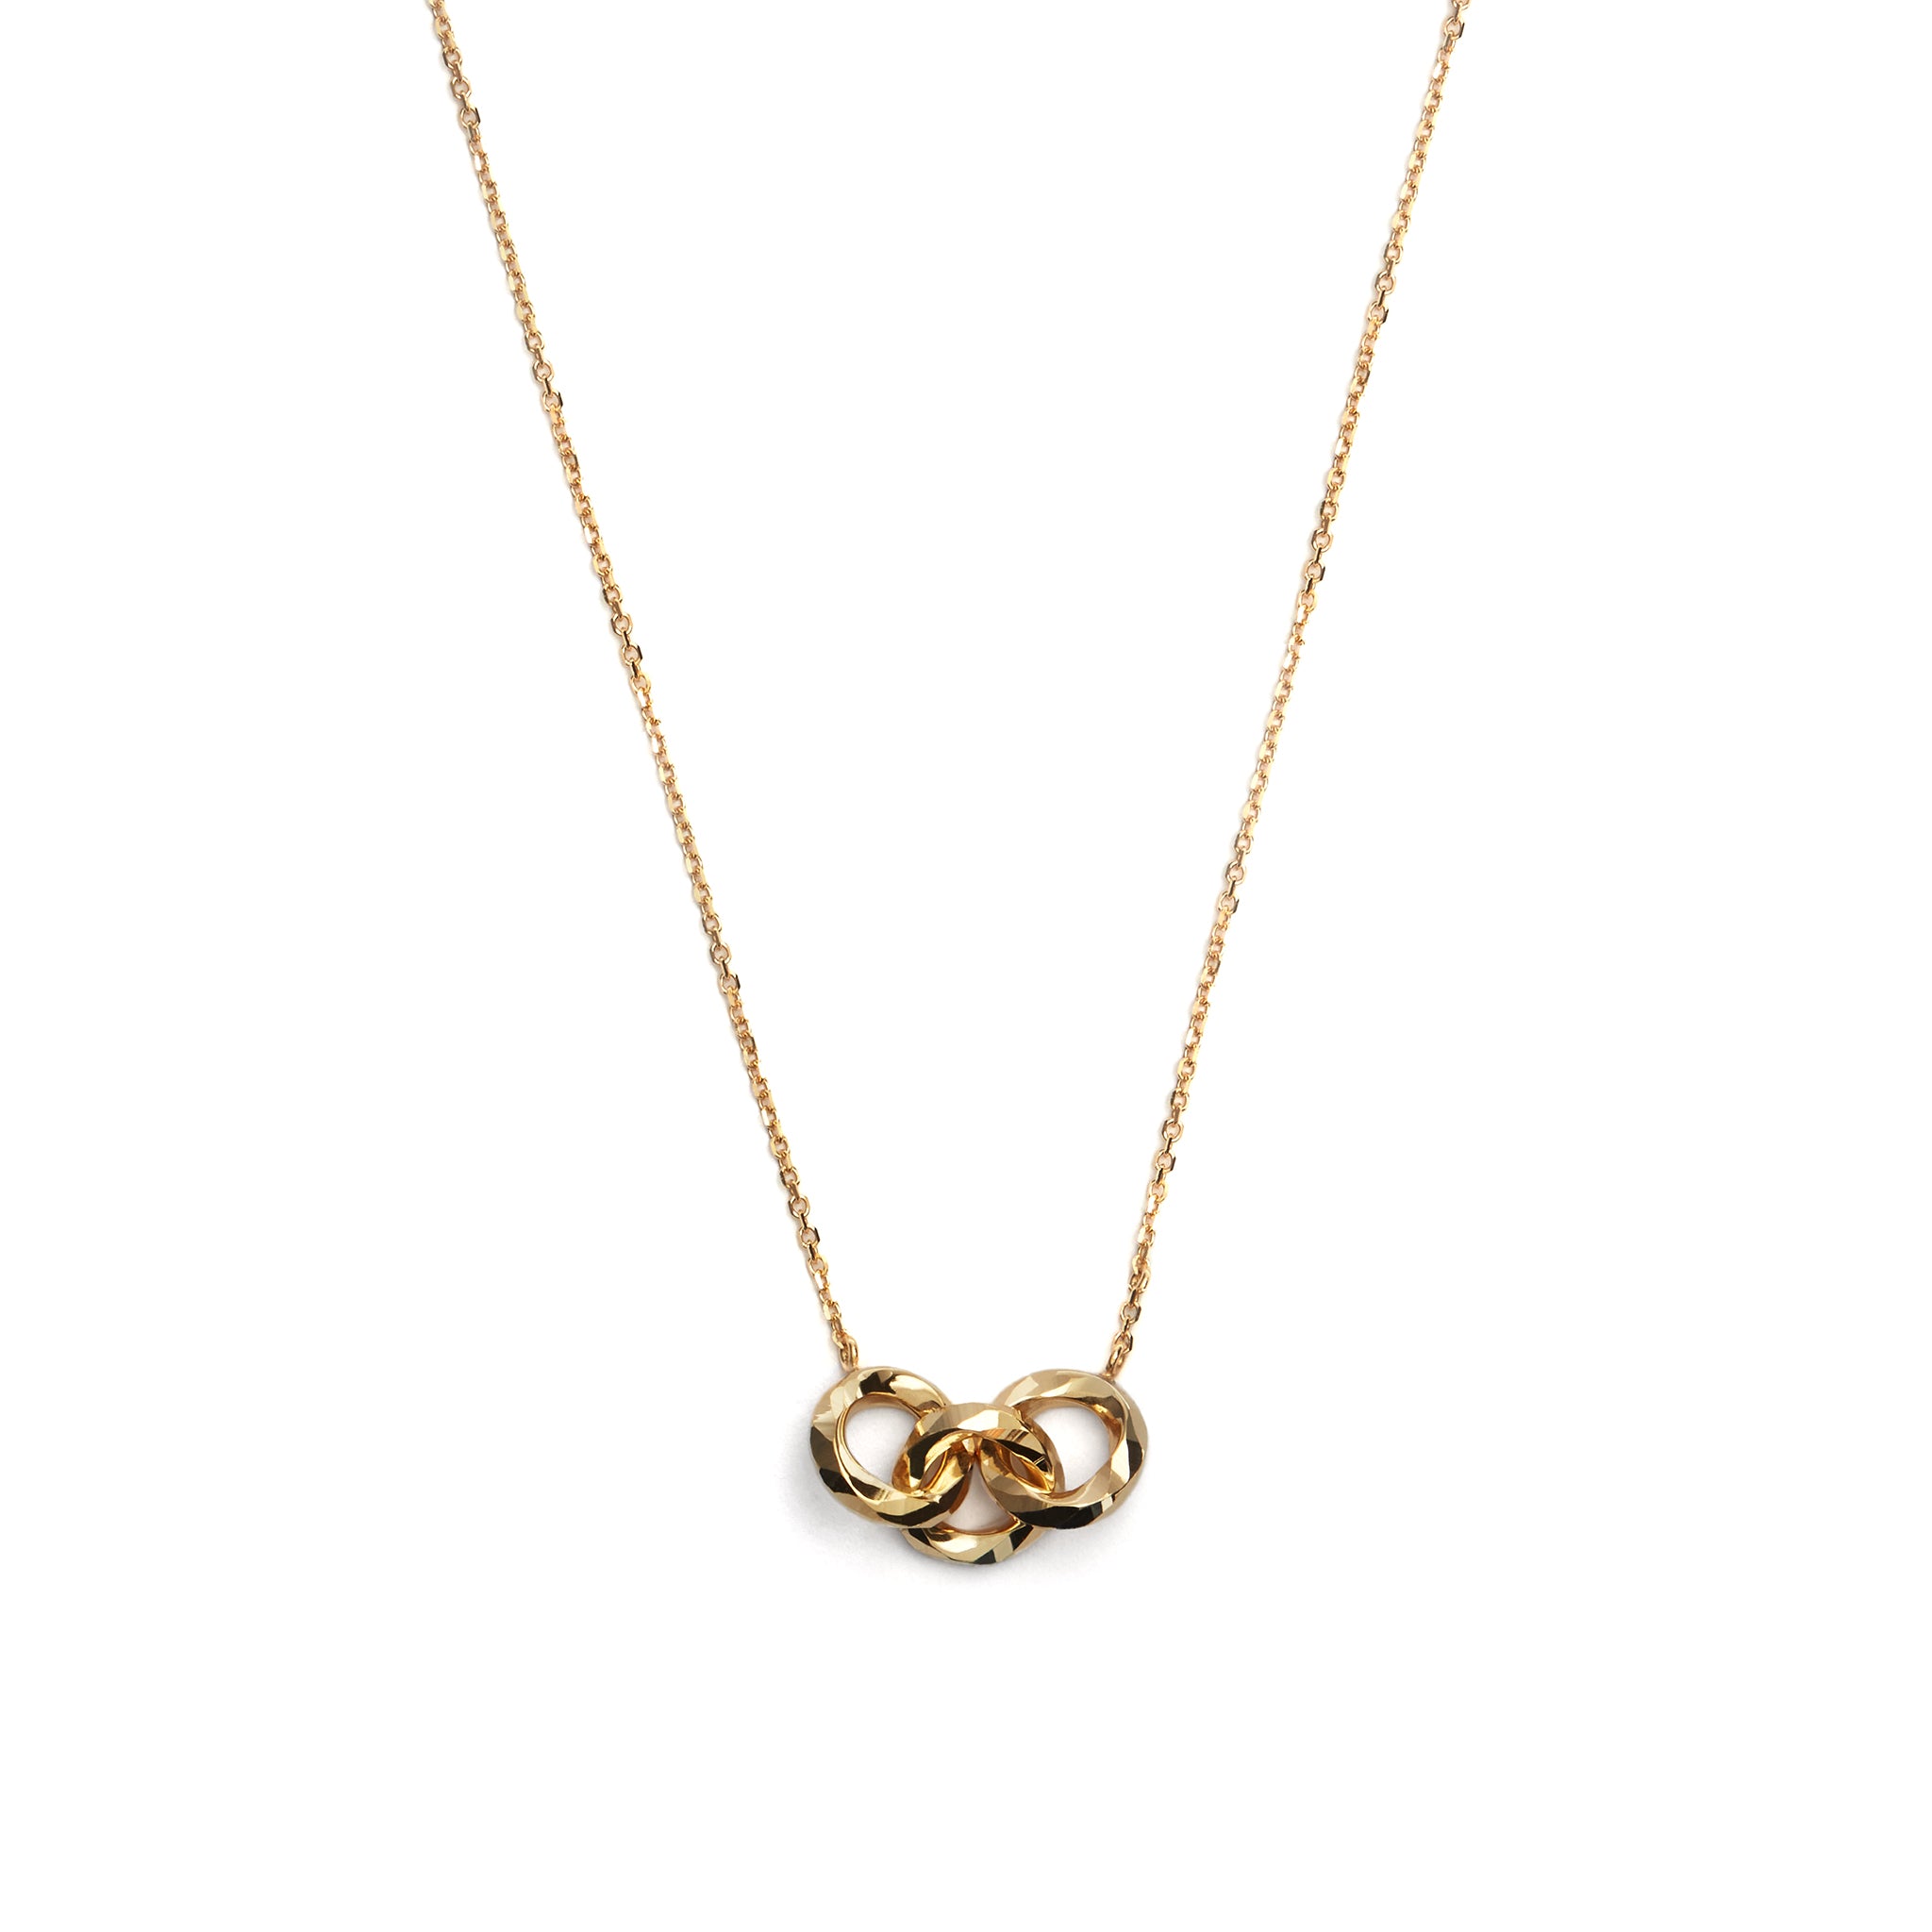 Add sophistication to your ensemble with the 9 carat yellow gold trio link pendant. This elegant accessory features three interconnected links, creating a timeless and versatile piece. Elevate your style with this chic and stylish pendant.